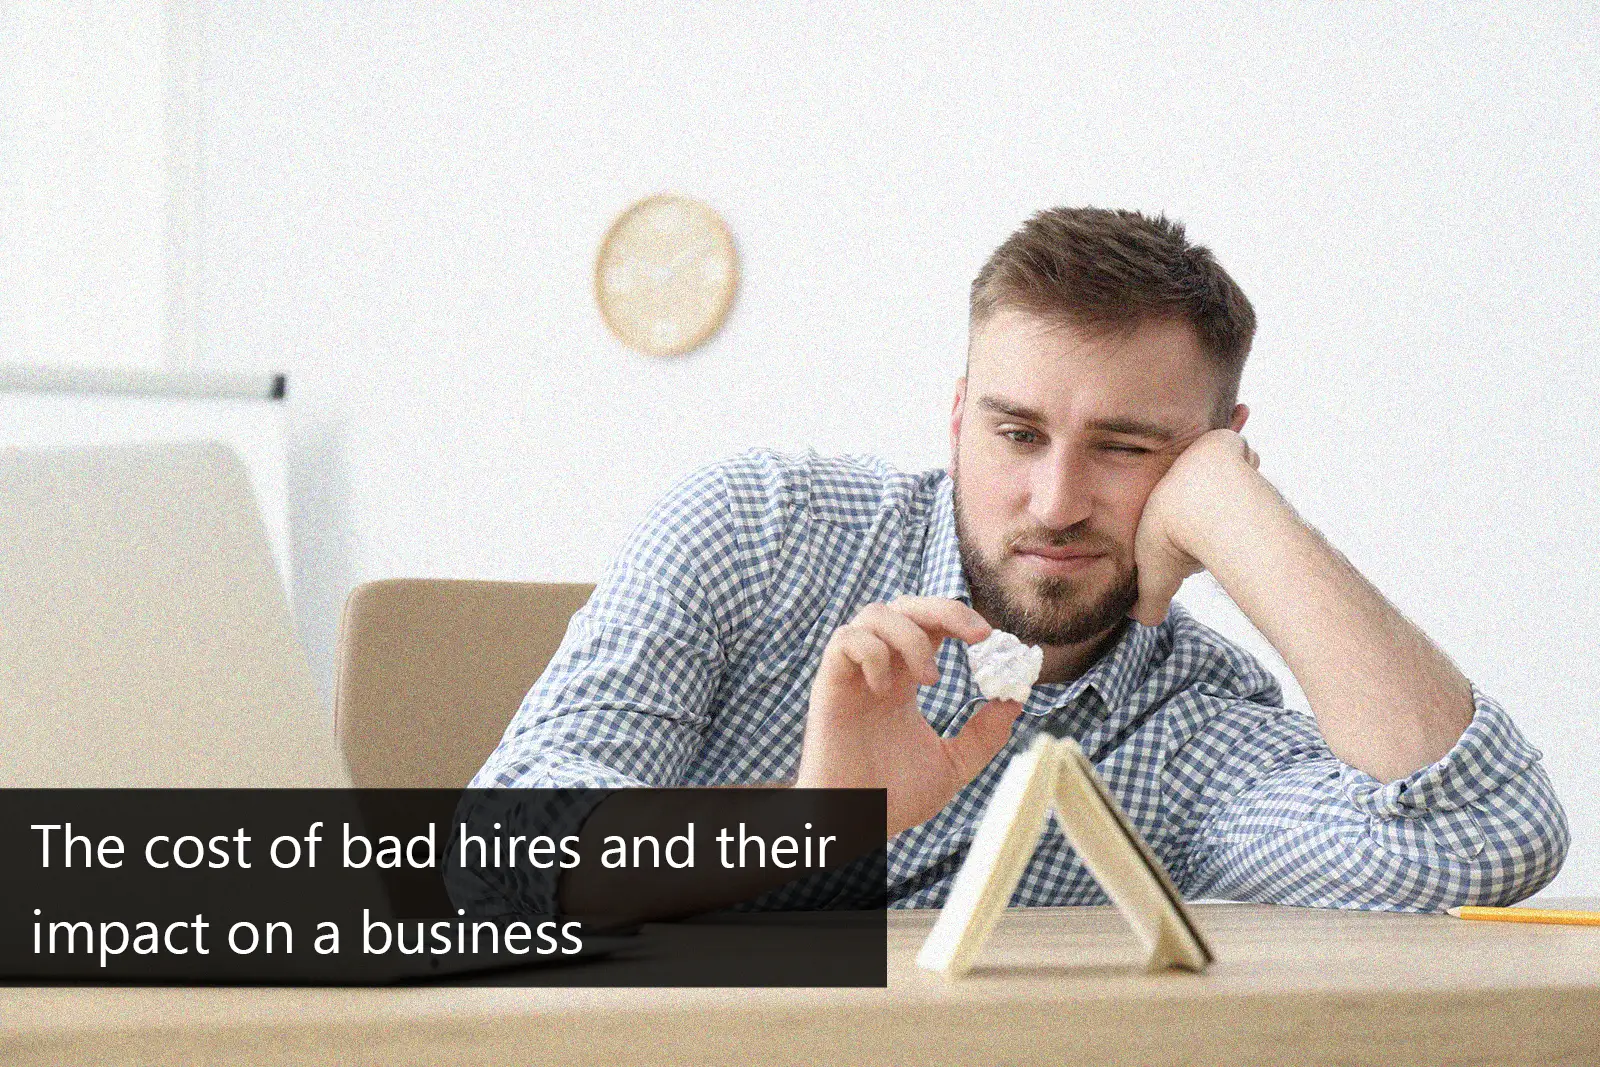 The cost of bad hires and their impact on a business